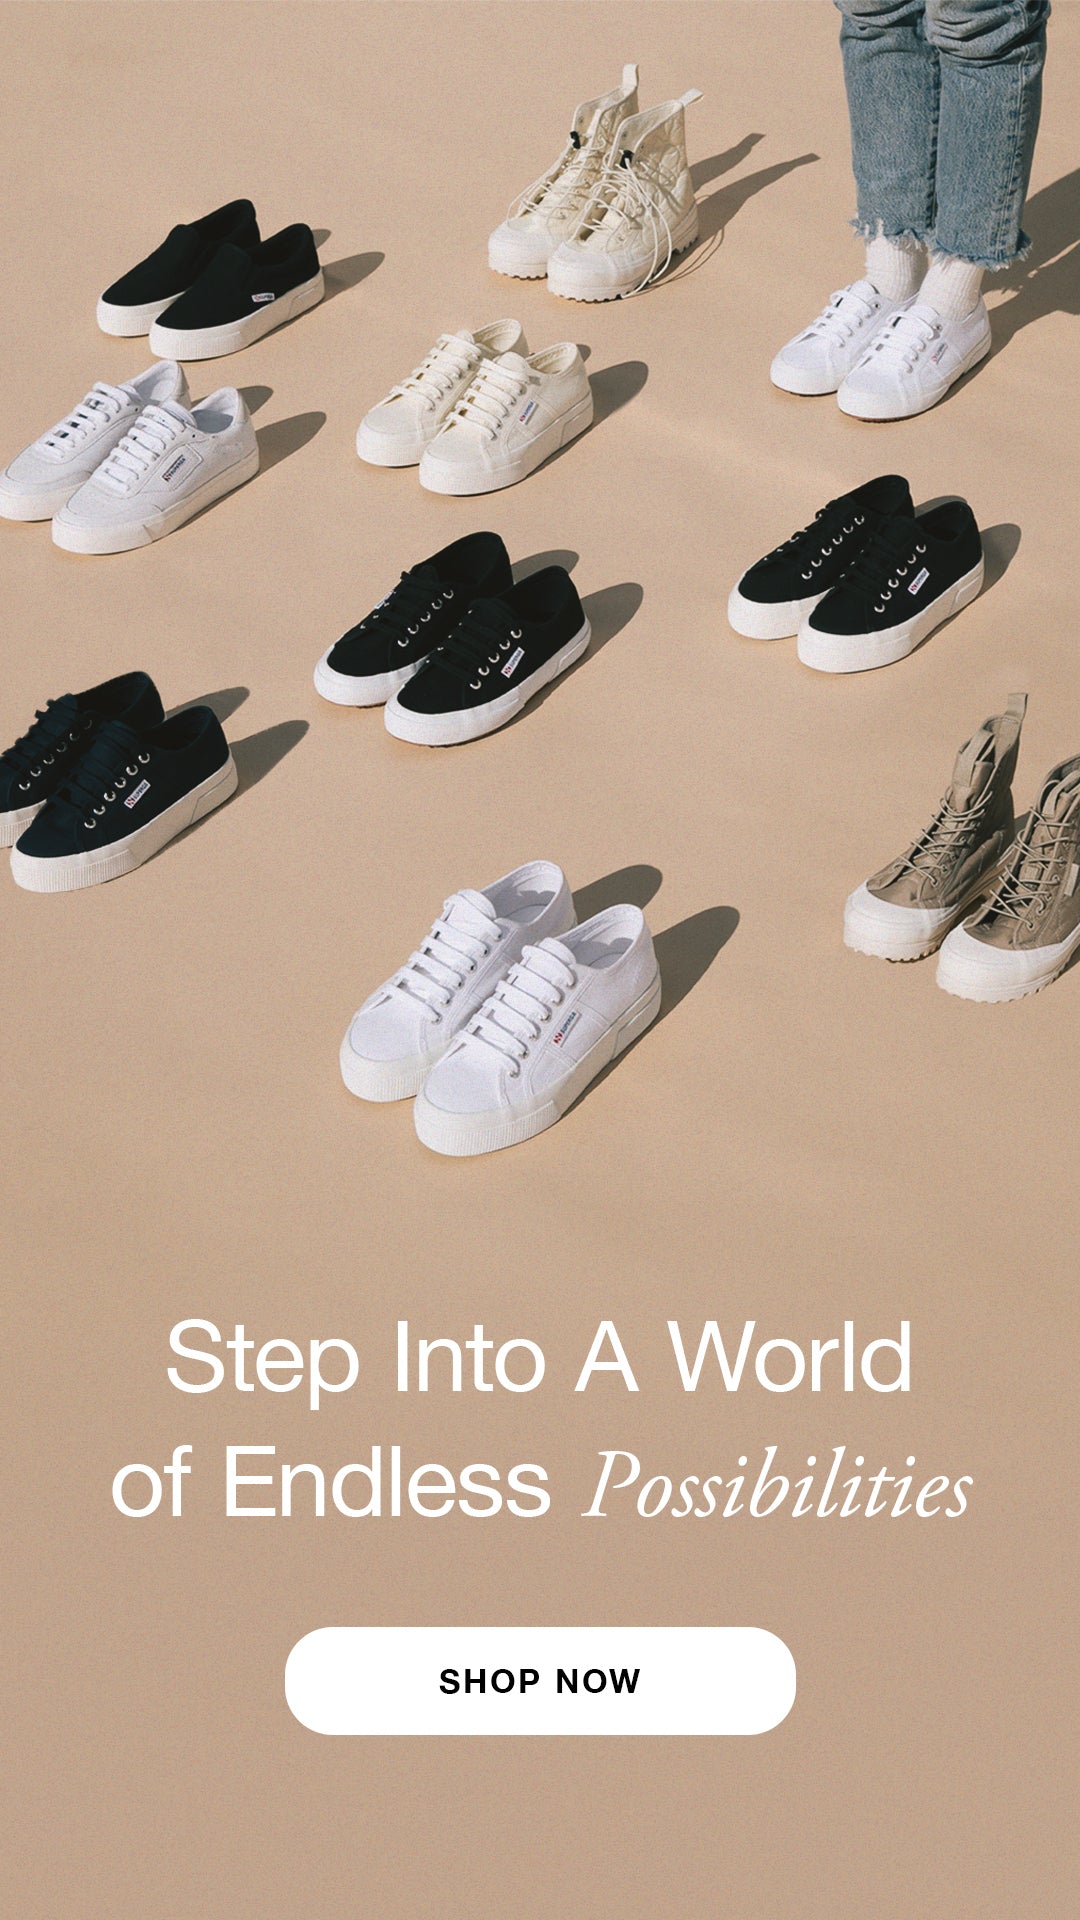 Step into a world of endless possibilities. Click here to Shop All Women's Sneakers.